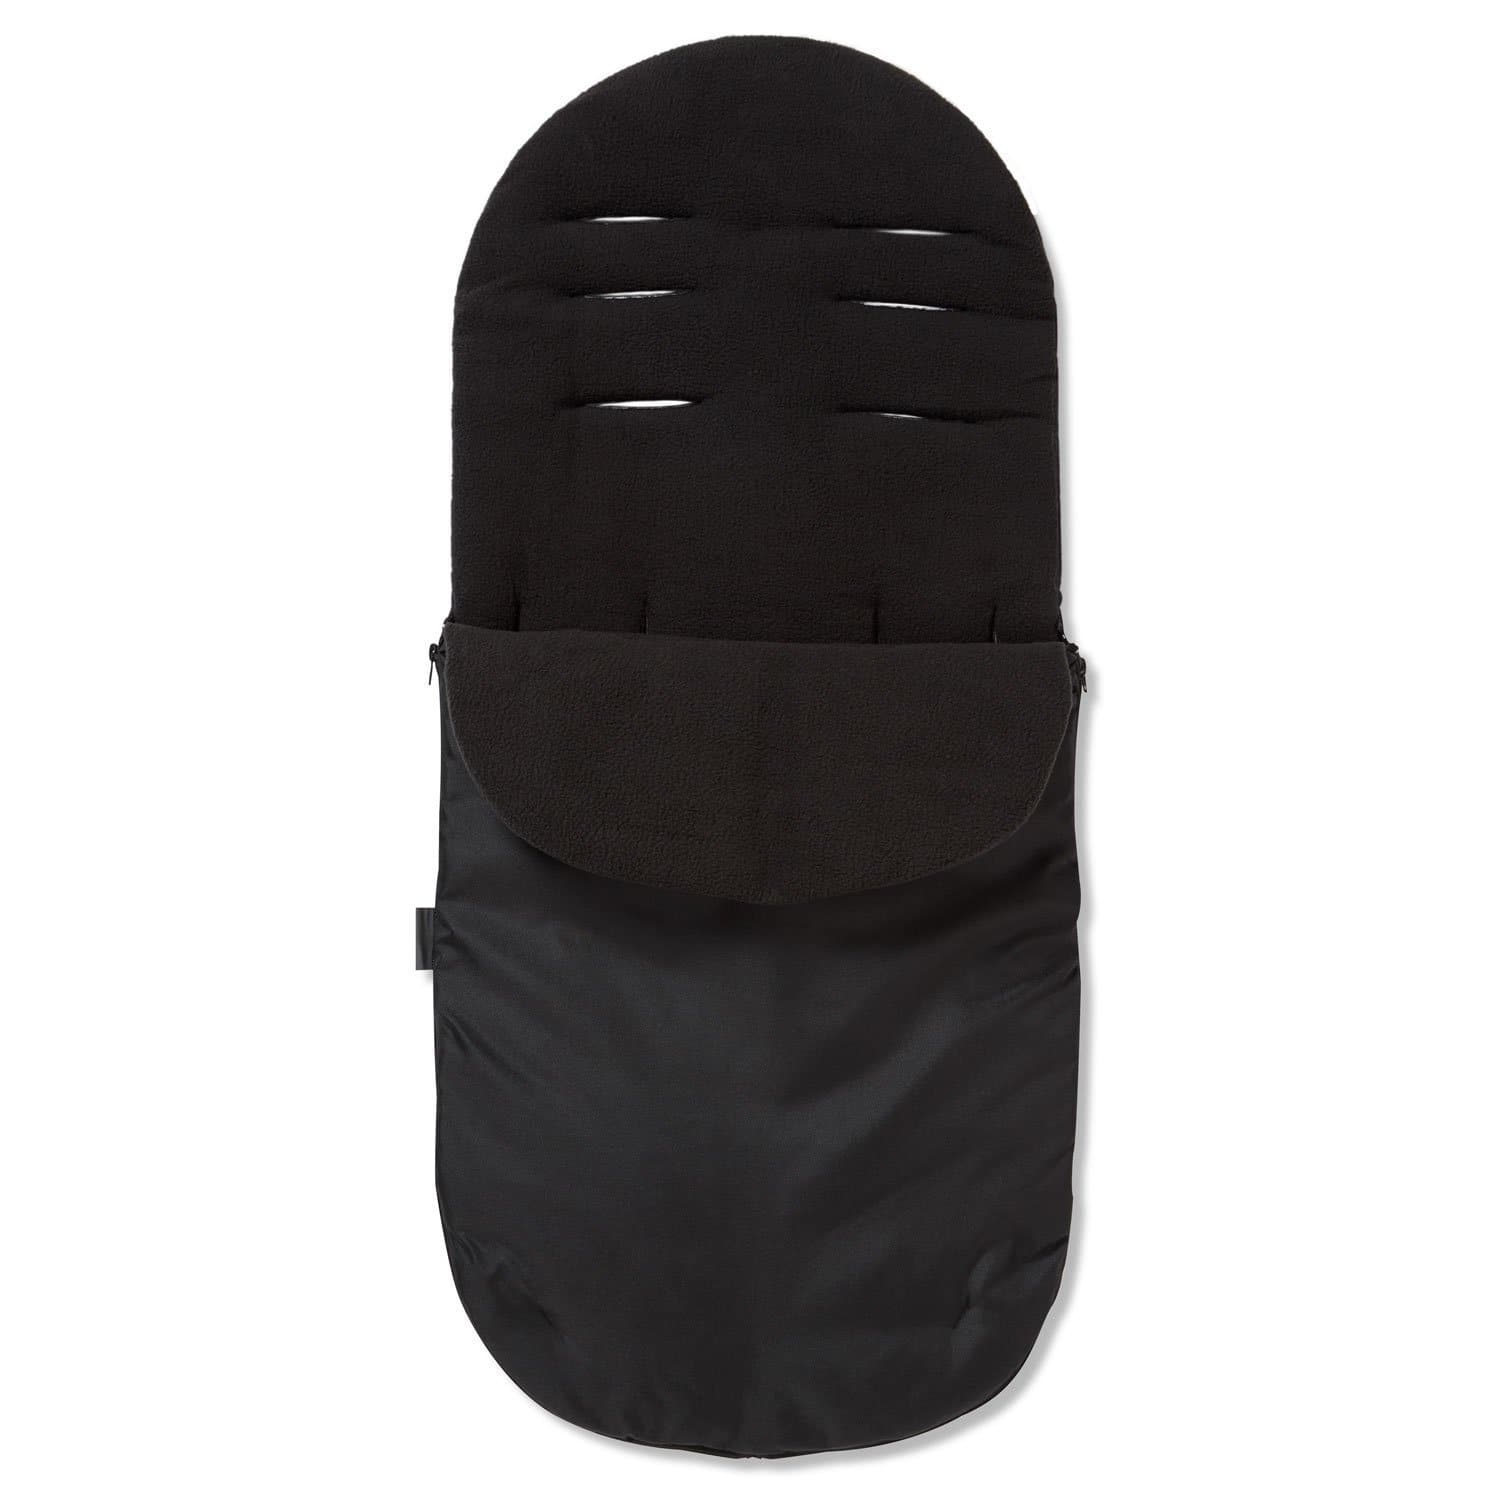 Footmuff / Cosy Toes Compatible with Venicci - Black / Fits All Models | For Your Little One